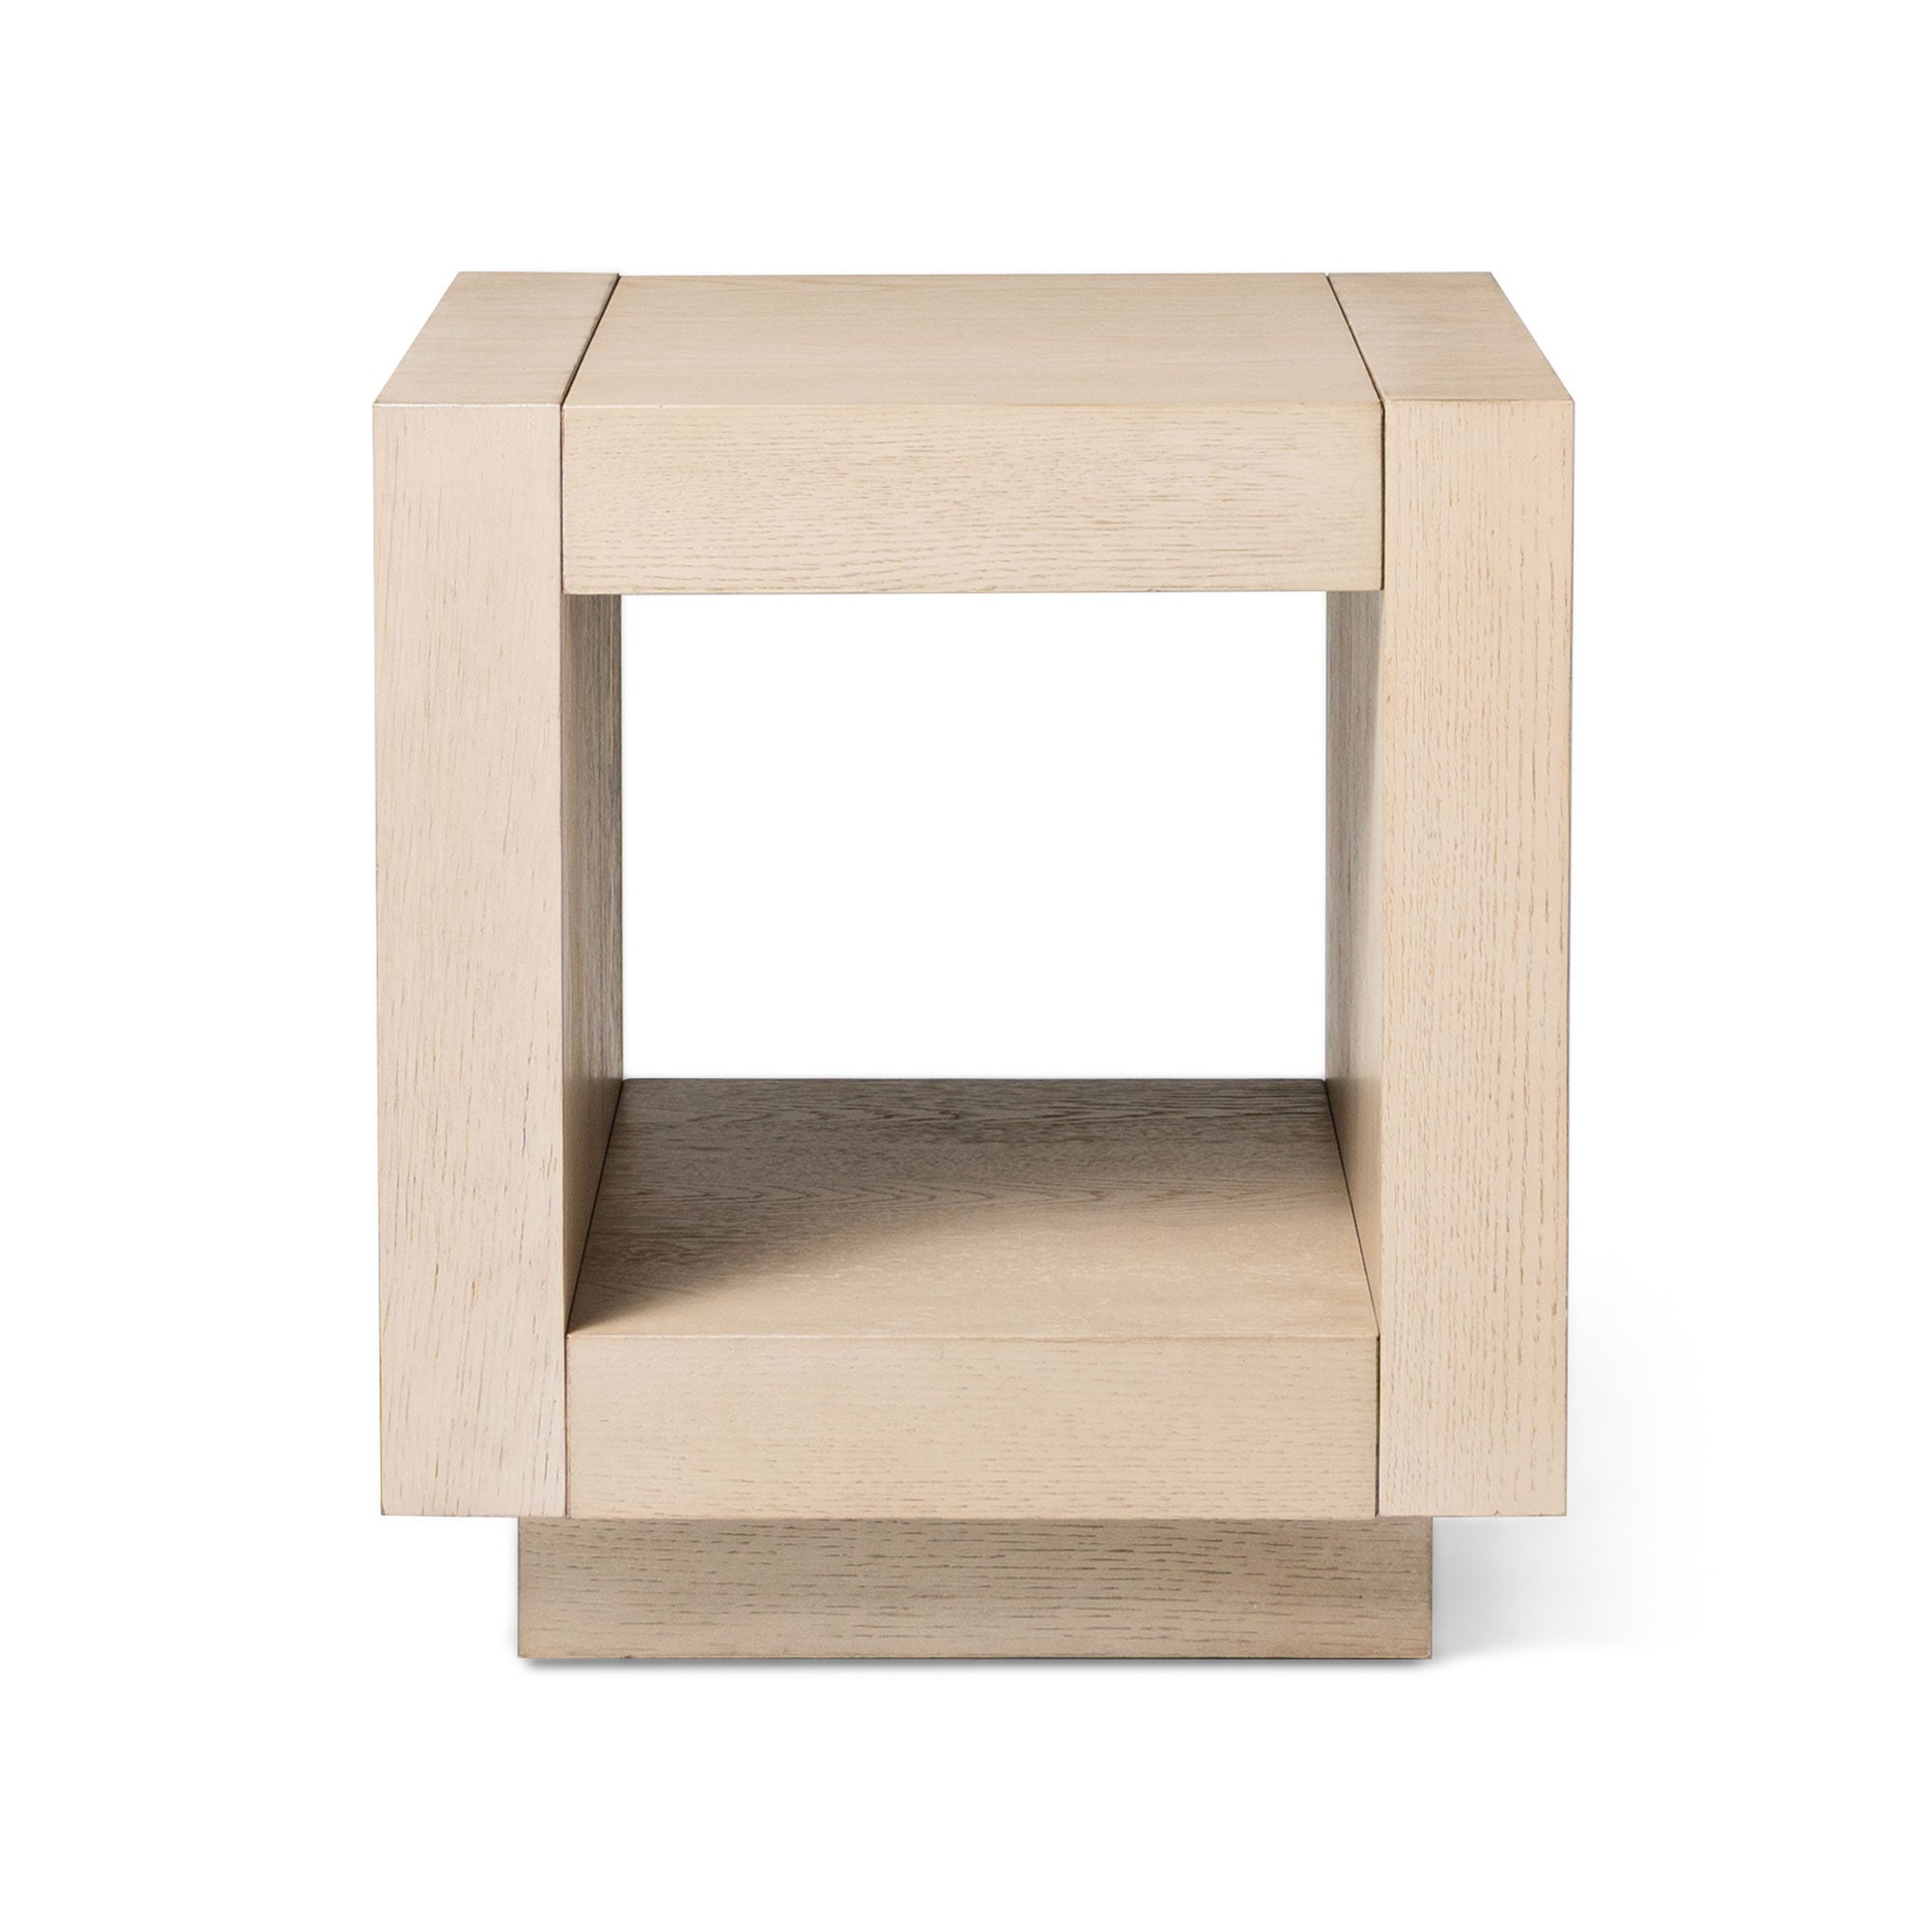 Artemis Contemporary Wooden Side Table in Refined White Finish in Furniture | Tables | Accent Tables | End Tables by Maven Lane